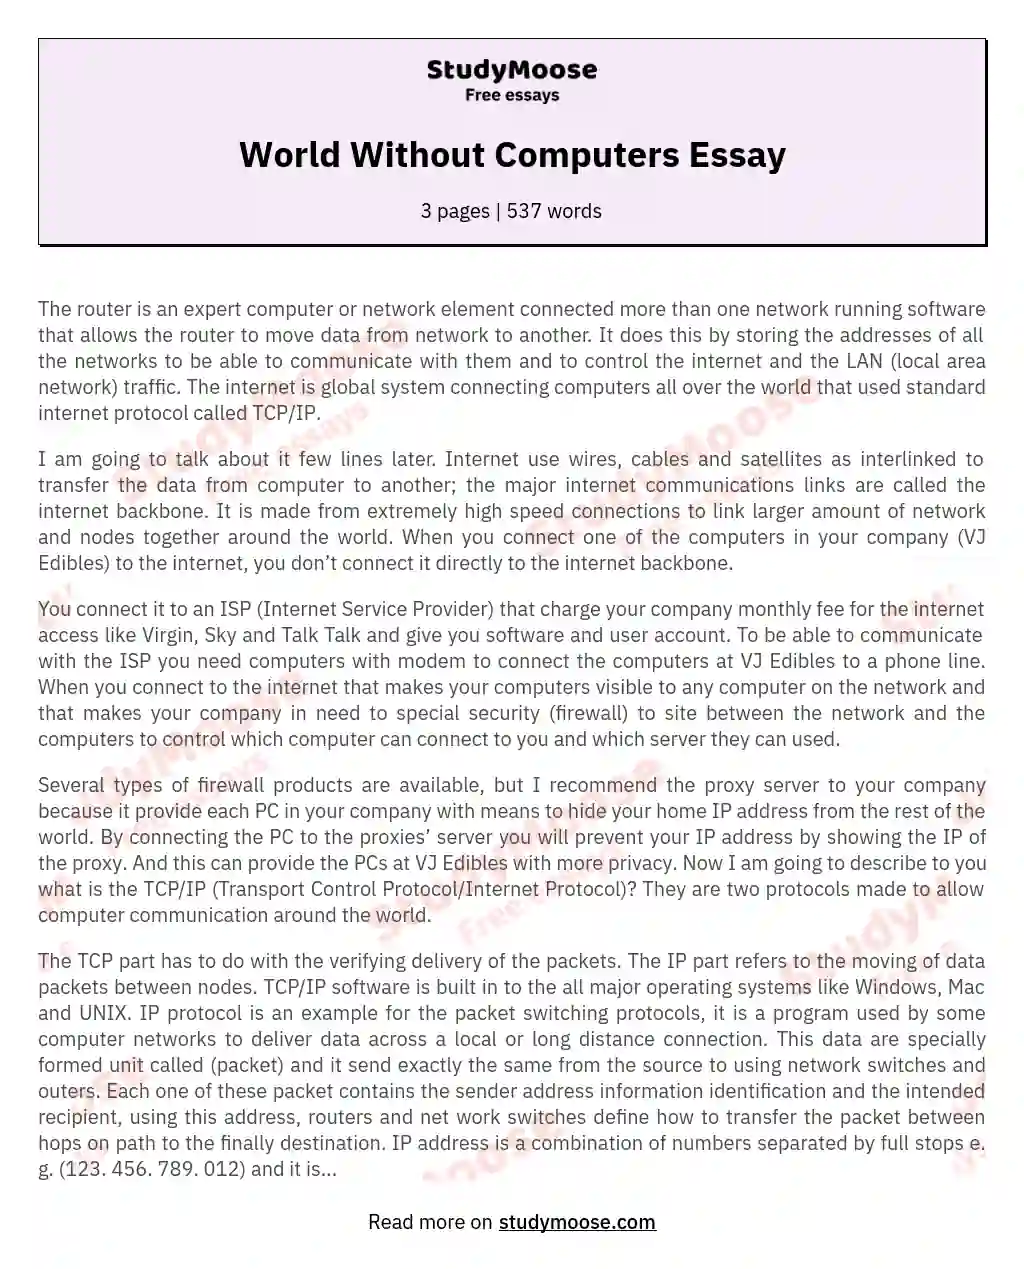 The Role of Routers and Firewalls in Computer Networks essay